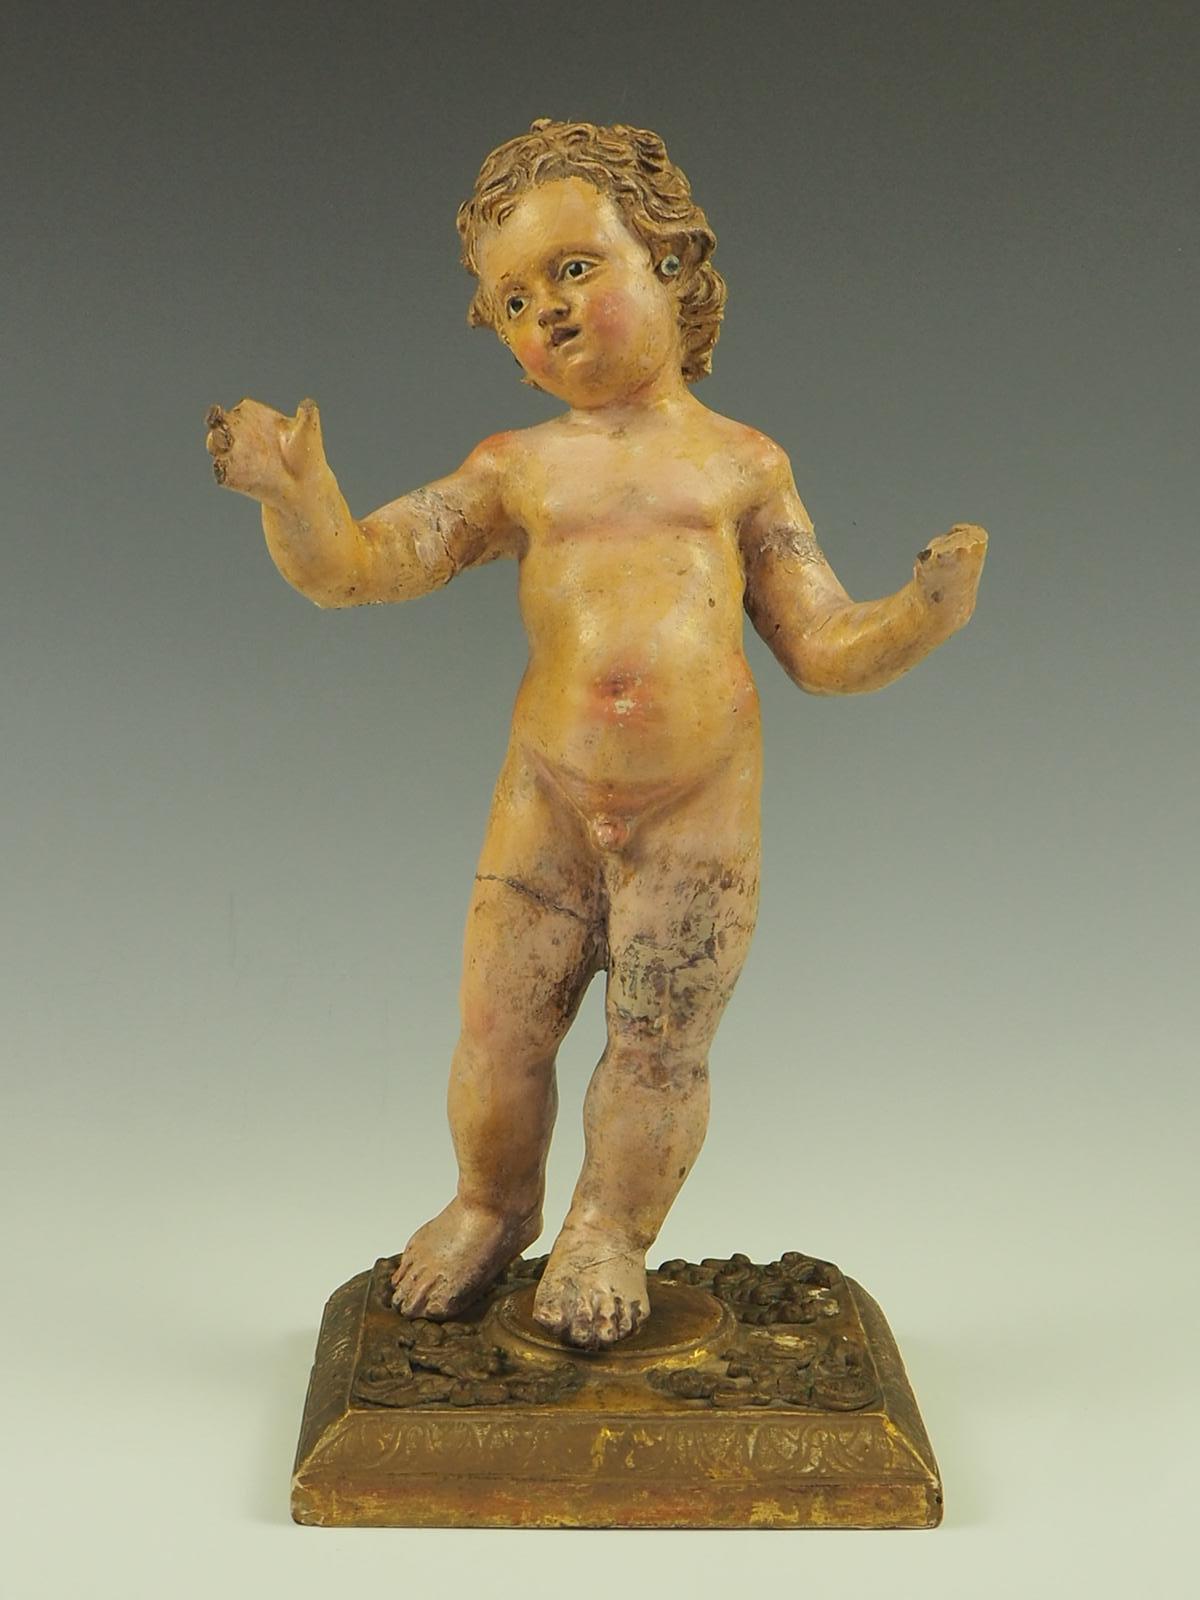 Exquisite product is a polychromed, hand painted terracotta figure that beautifully depicts Baby Jesus. The attention to detail is evident in the figure's glass eyes, which add a lifelike quality to the piece. Standing on a meticulously carved and